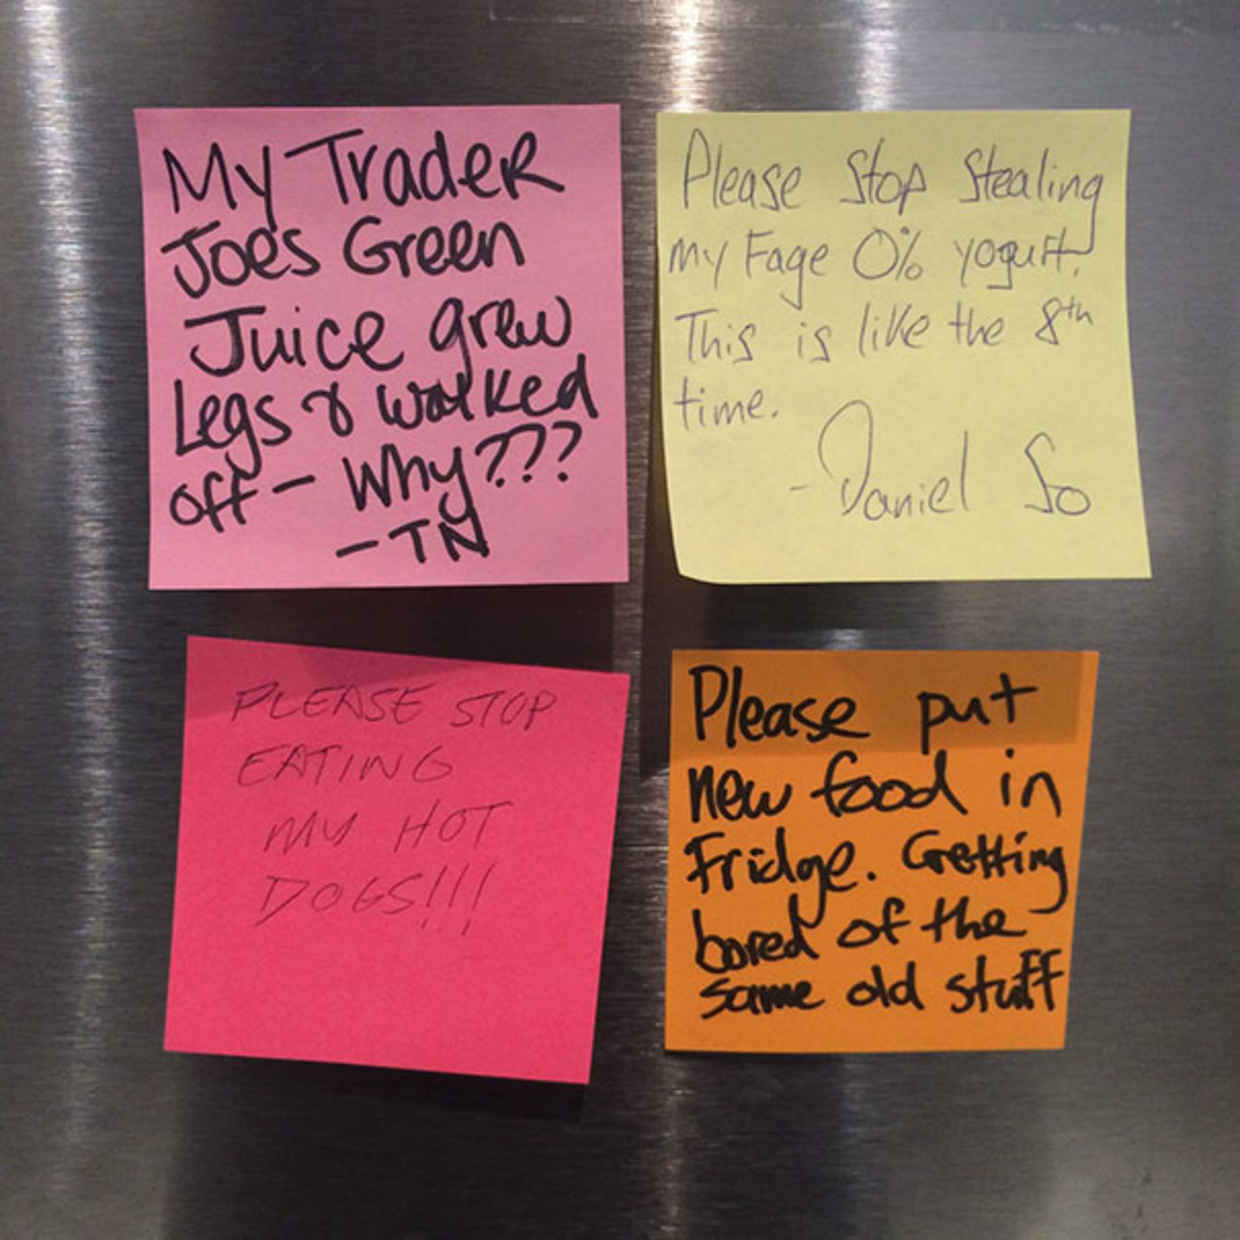 Hilarious Notes Left By The Smart Ass In The Office